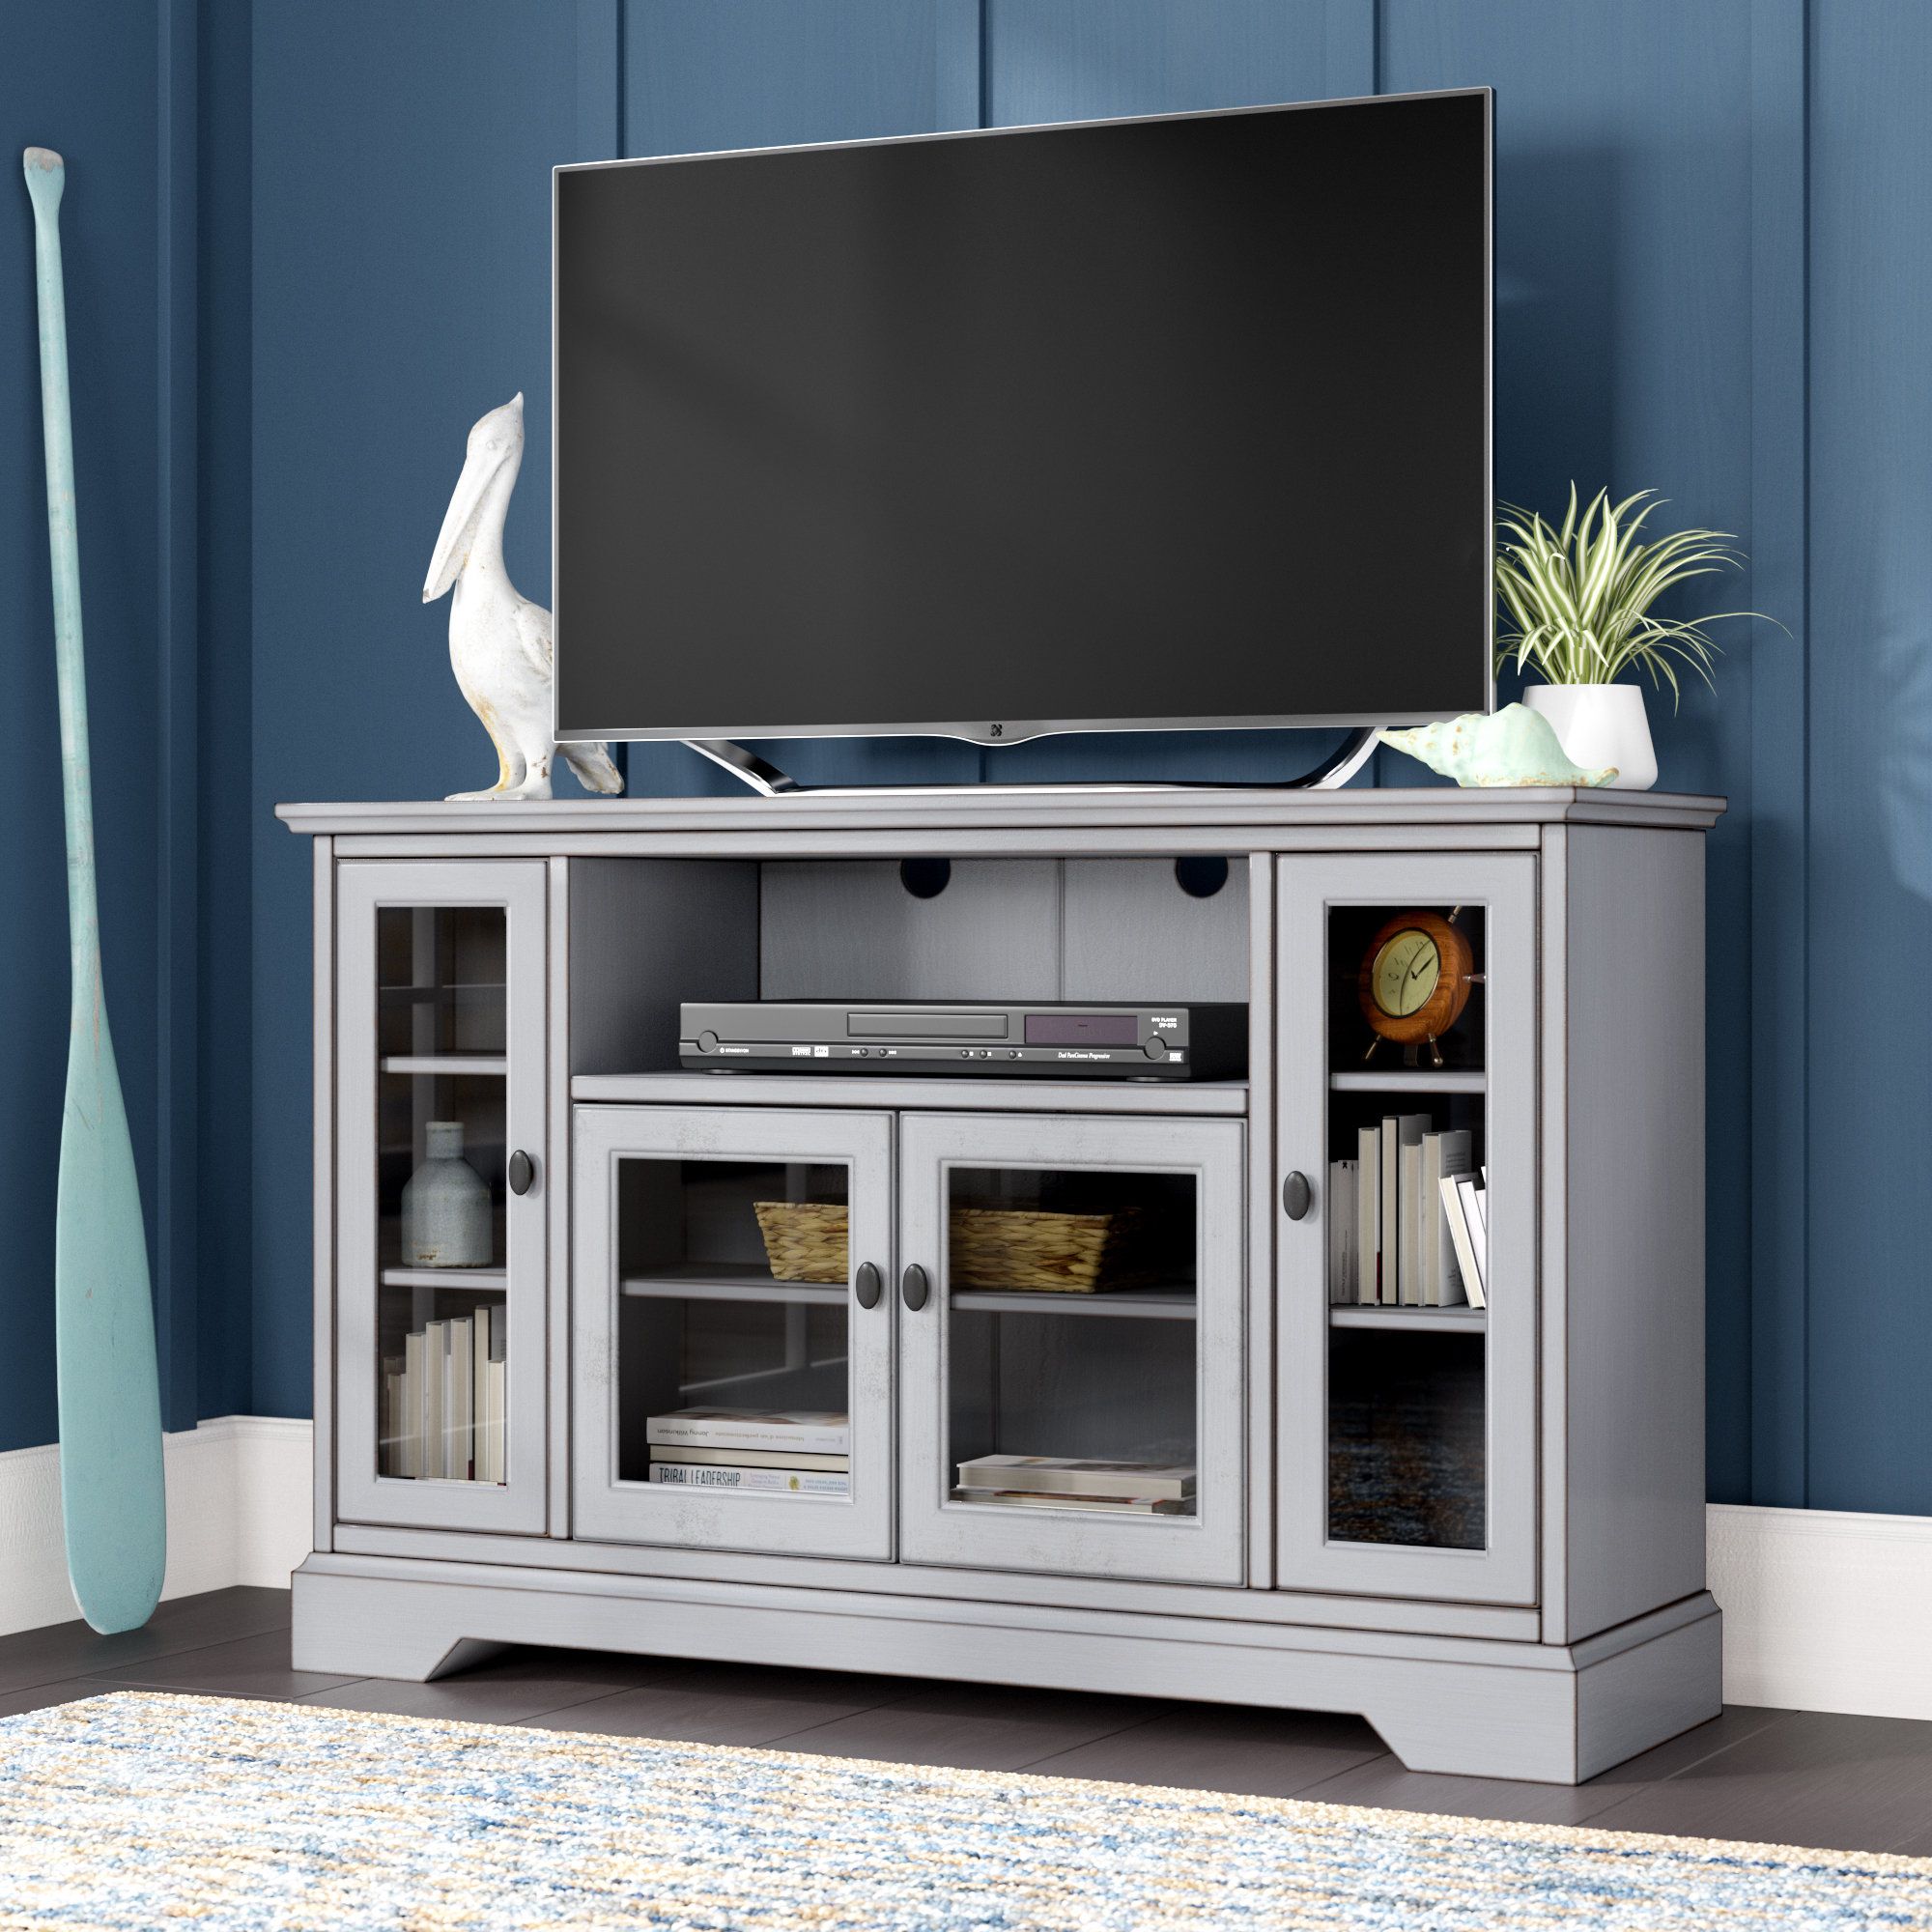 Beachcrest Home Josie Tv Stand For Tvs Up To 55 Reviews Wayfair Throughout Walton Grey 60 Inch Tv Stands 